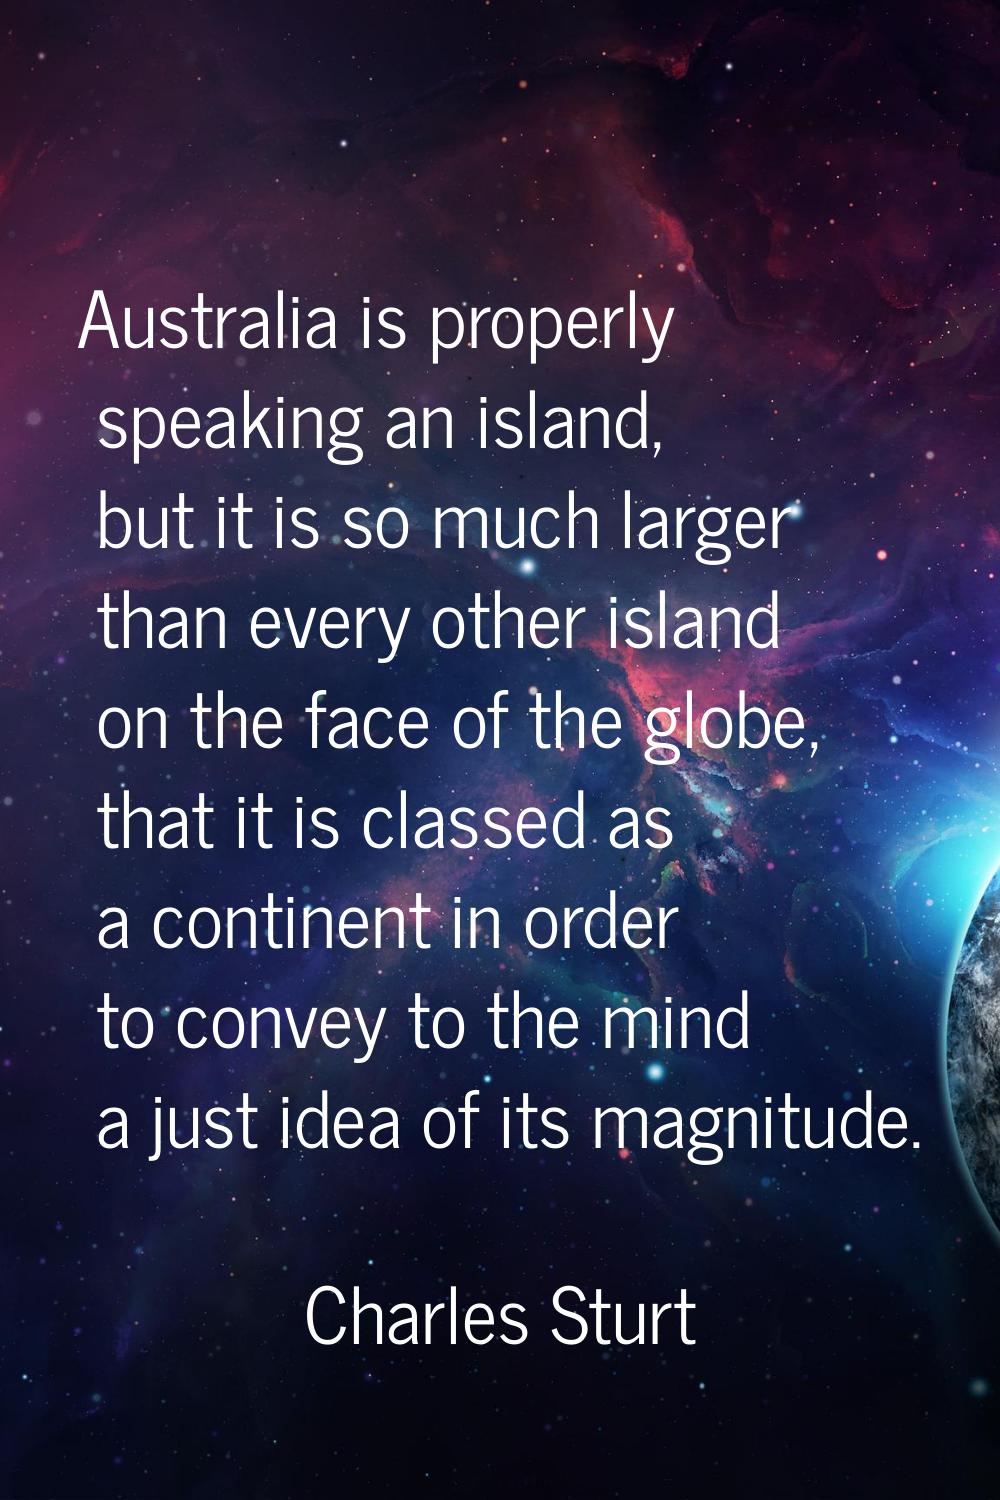 Australia is properly speaking an island, but it is so much larger than every other island on the f